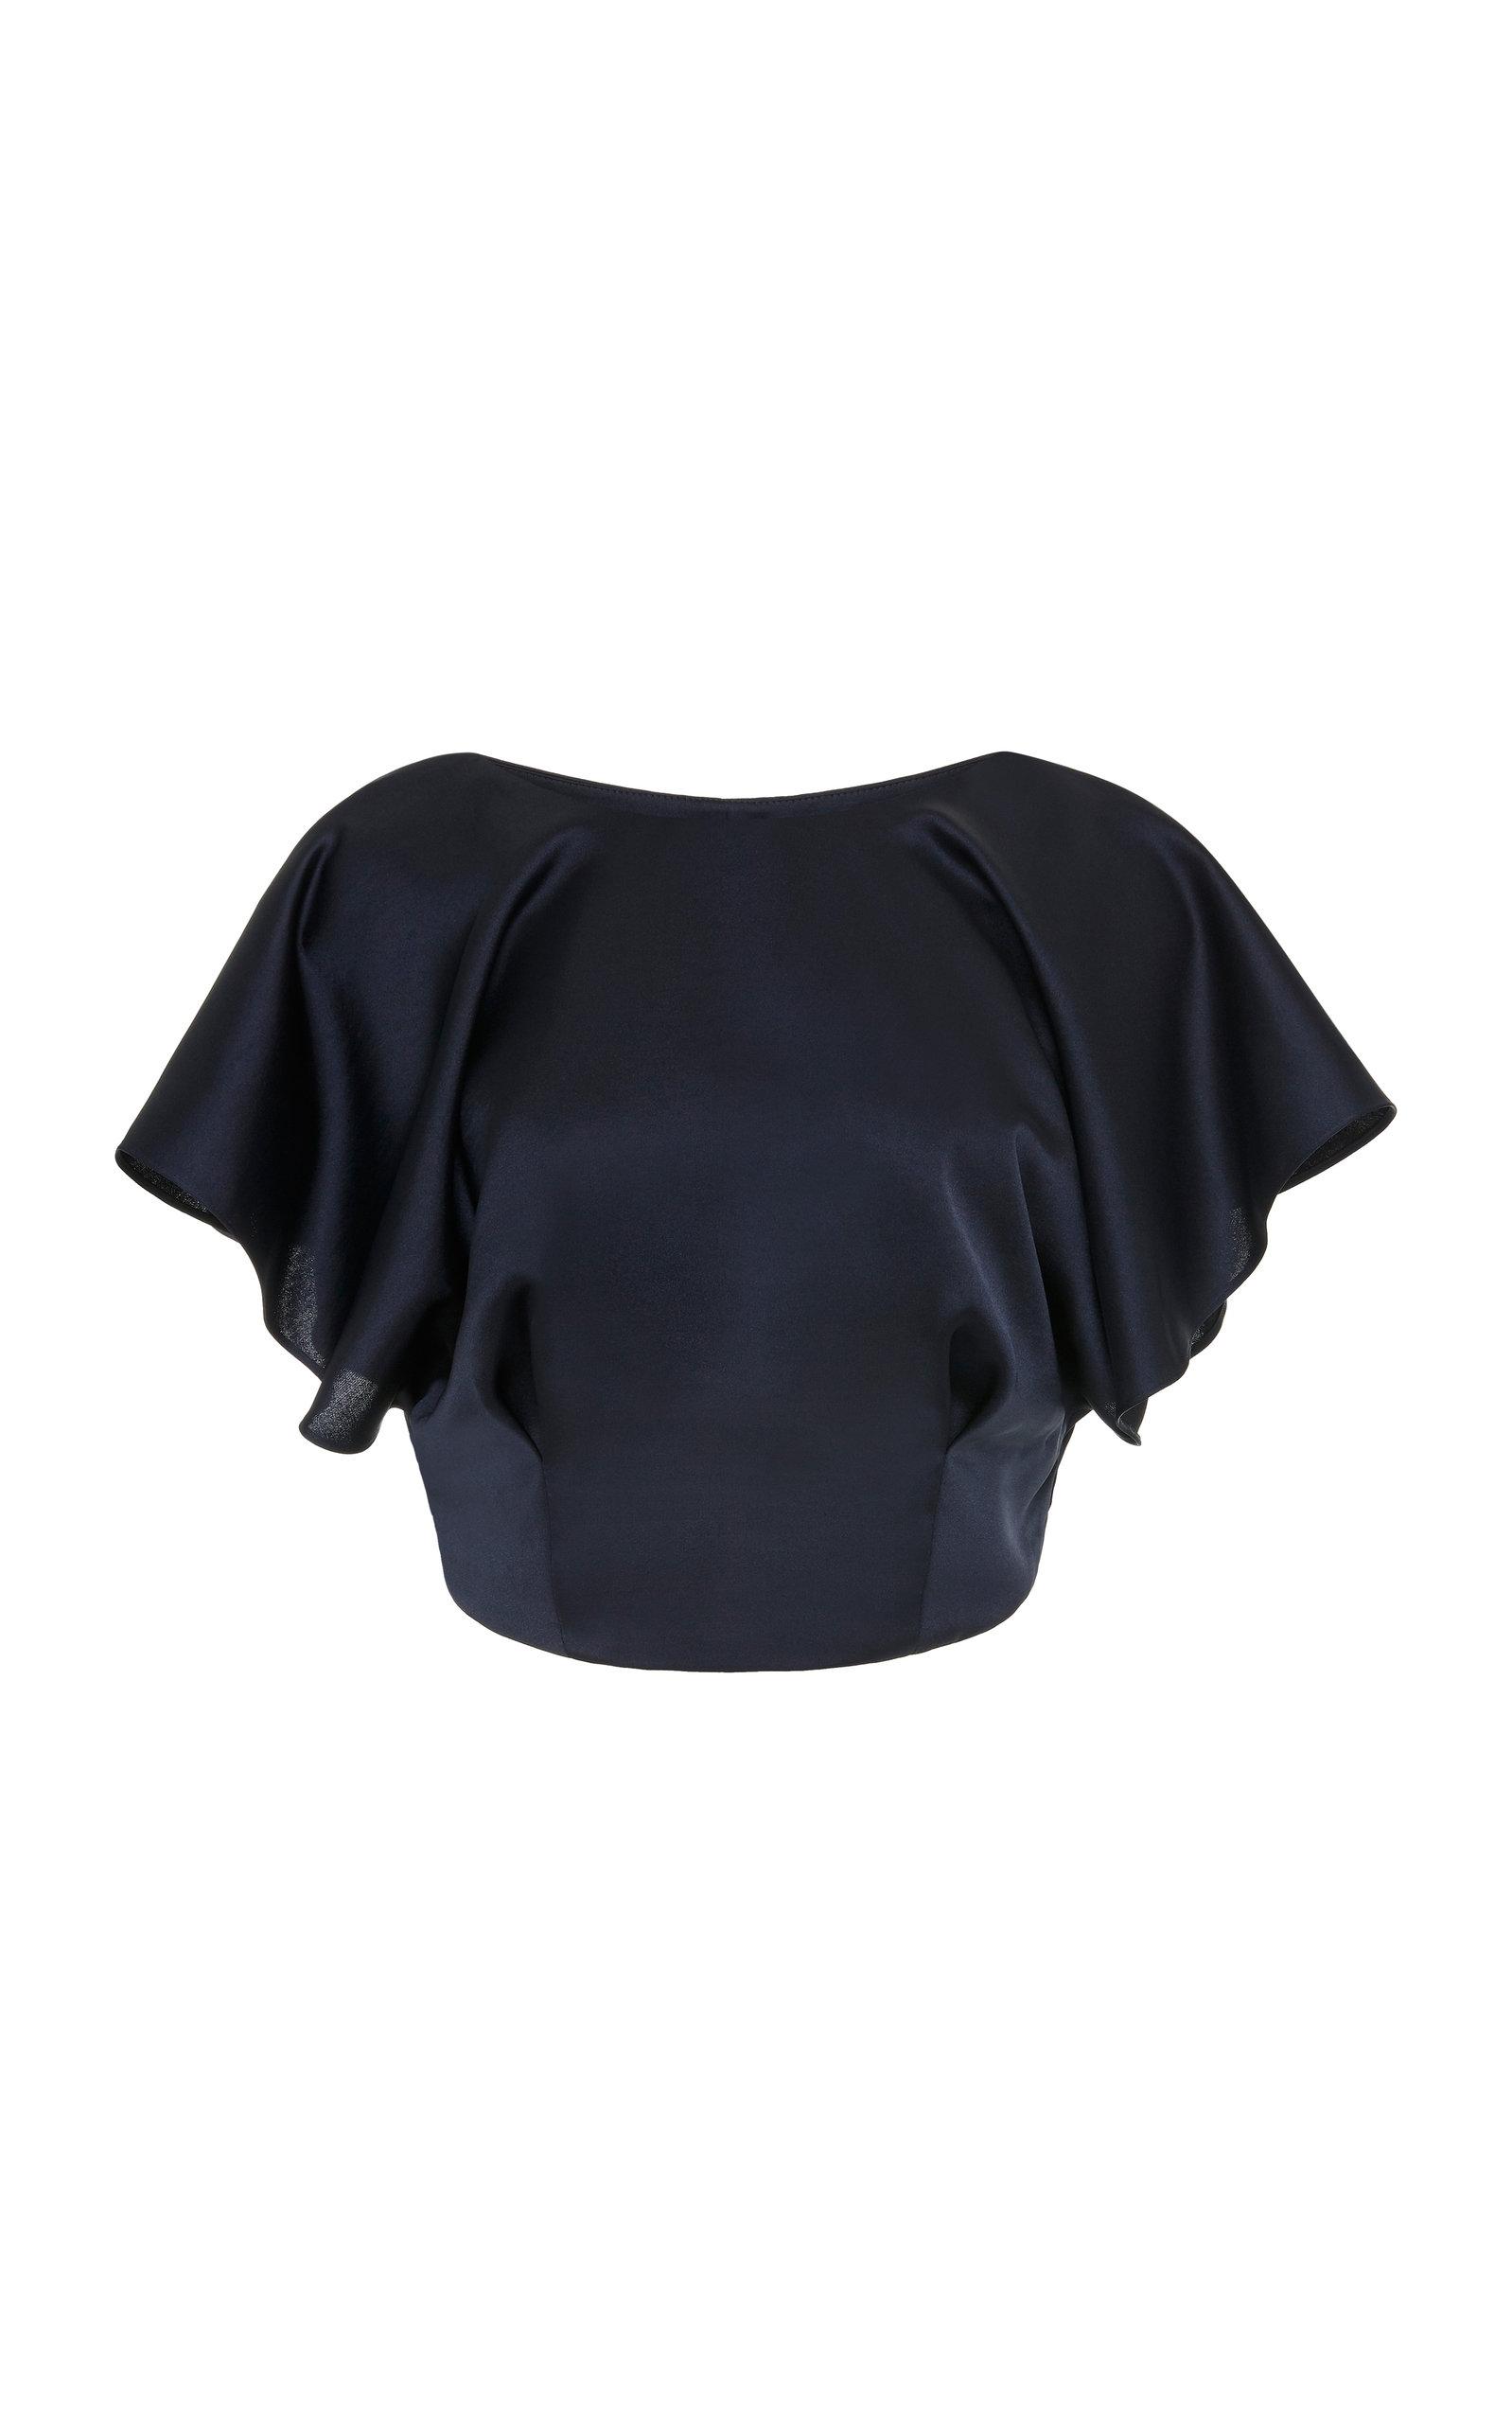 Acler Synthetic Jervois Cropped High Neck Top in Navy (Blue) - Lyst